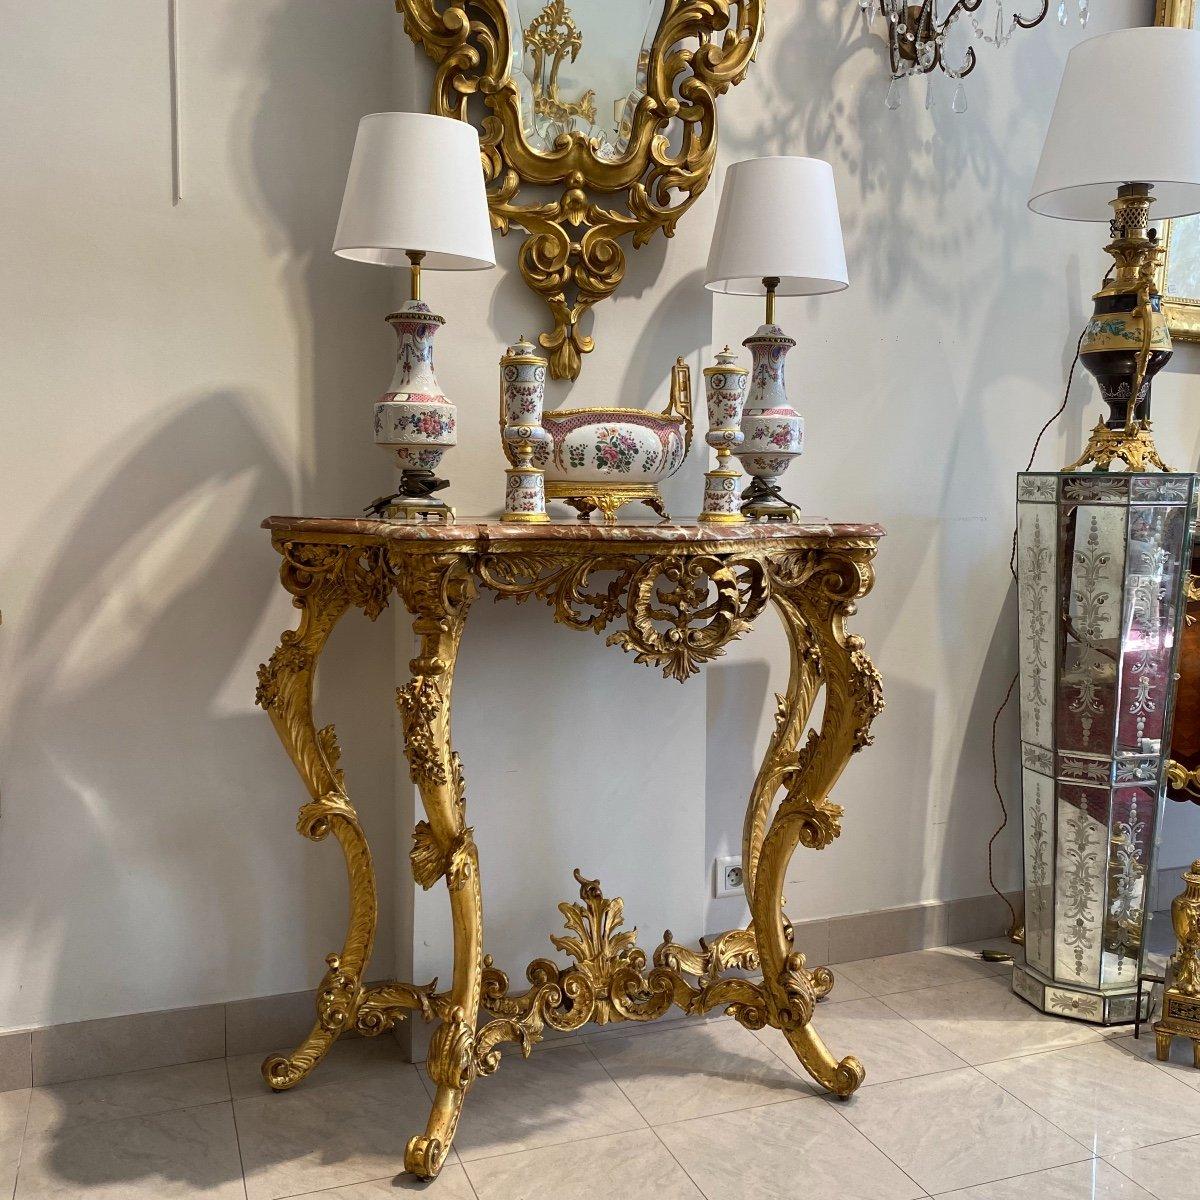 We present you this magnificent Louis XV transition-style console table from the Napoleon III period. It is in gilt wood and supported by four cabriole legs connected by a stretcher. Its elegant appearance is accentuated by its Turquin red-veined